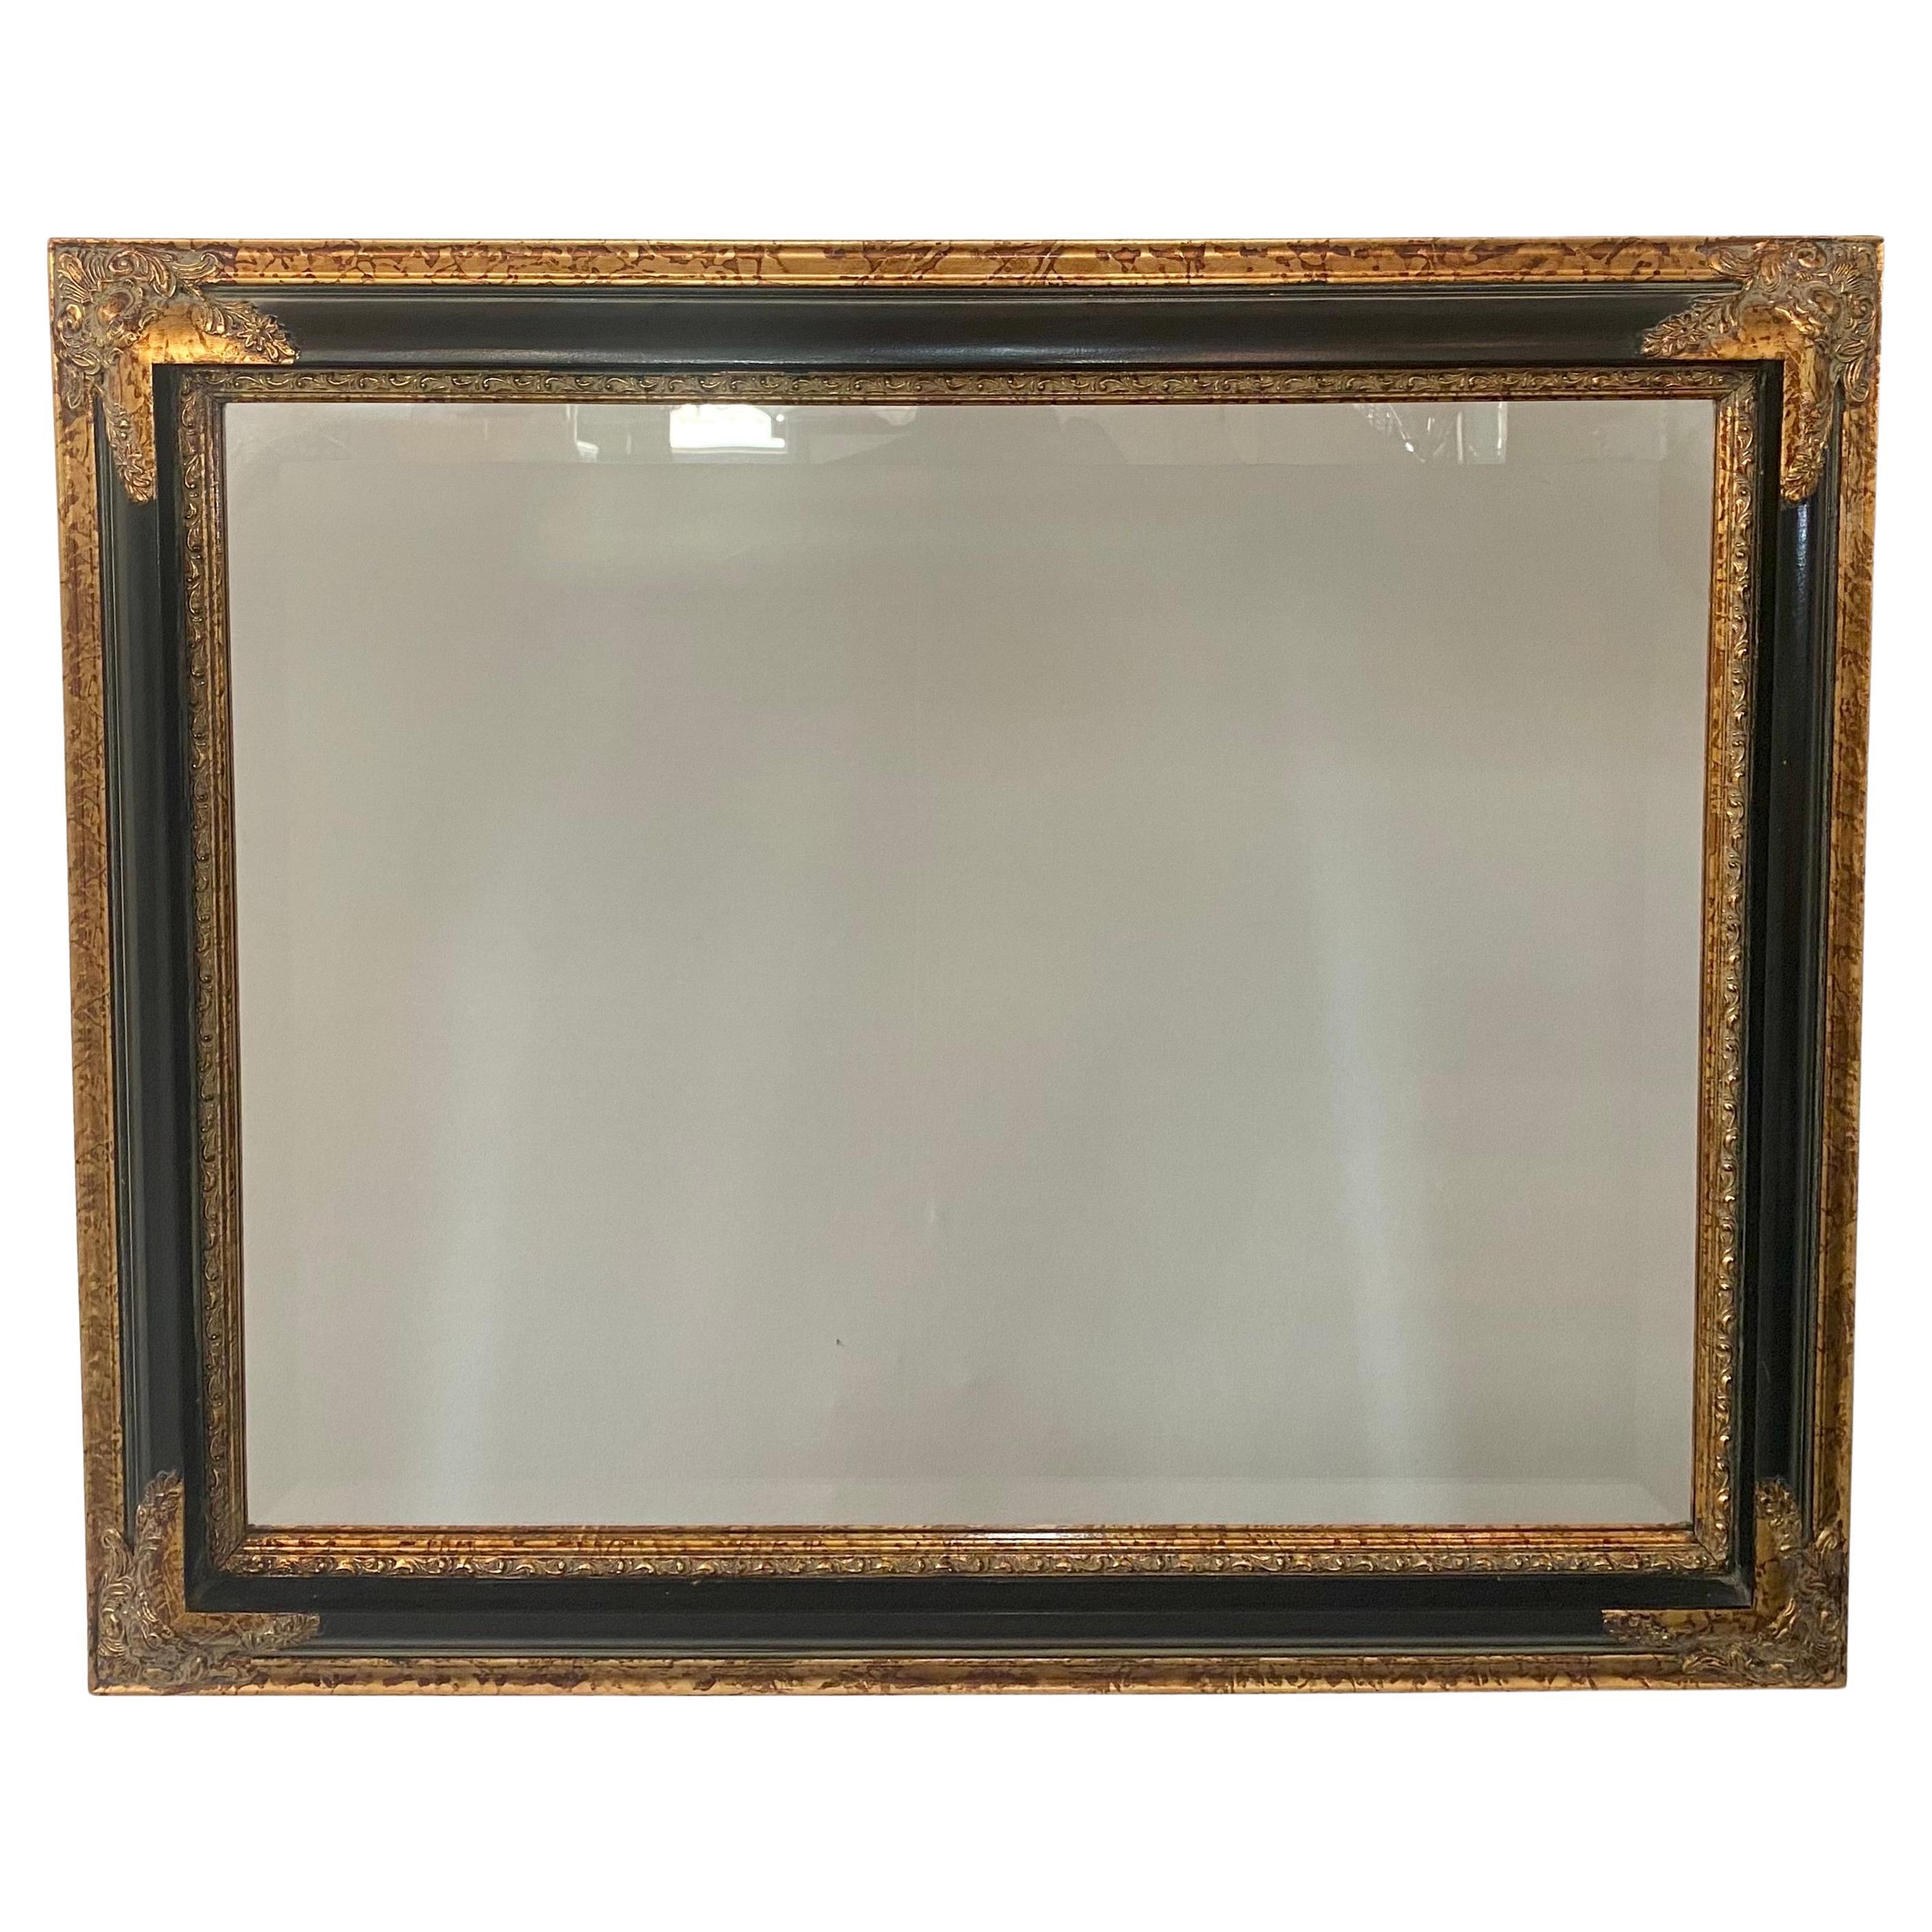 An elegant Baroque style rectangular mirror featuring a hand-carved frame made of ebony with a tortoise frame, an unusual mix which adds style to this classic design. The mirror corners and inner frame shows fine carved floral and leaves design in